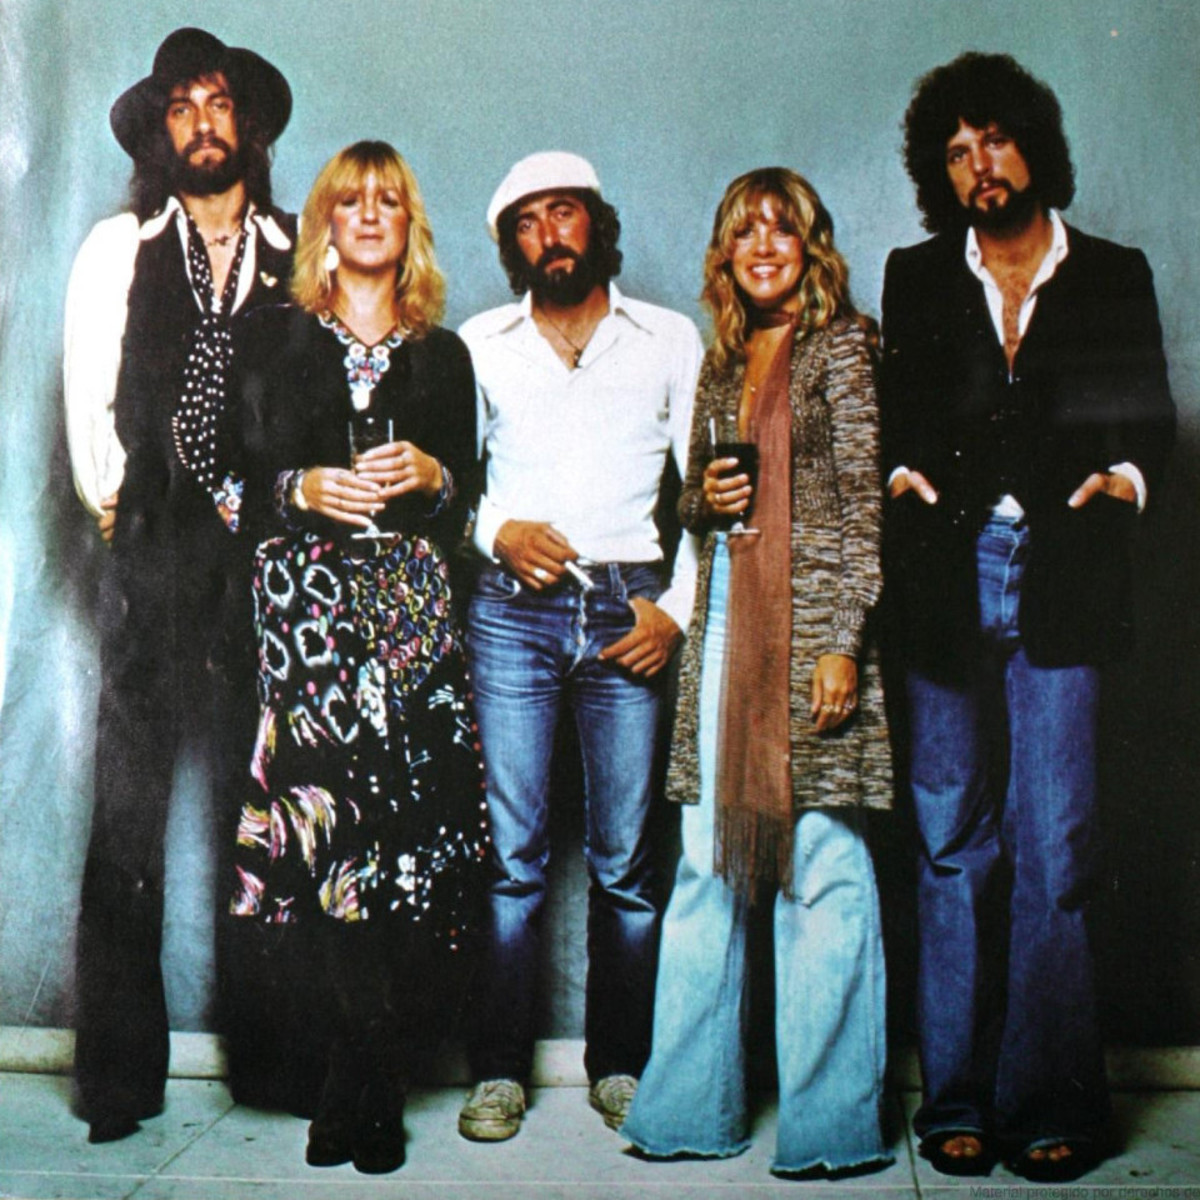 Fleetwood Mac became the greatest soft rockers of all time when Stevie Nicks (second from right) and Lindsay Buckingham (far right) joined the band in 1975.